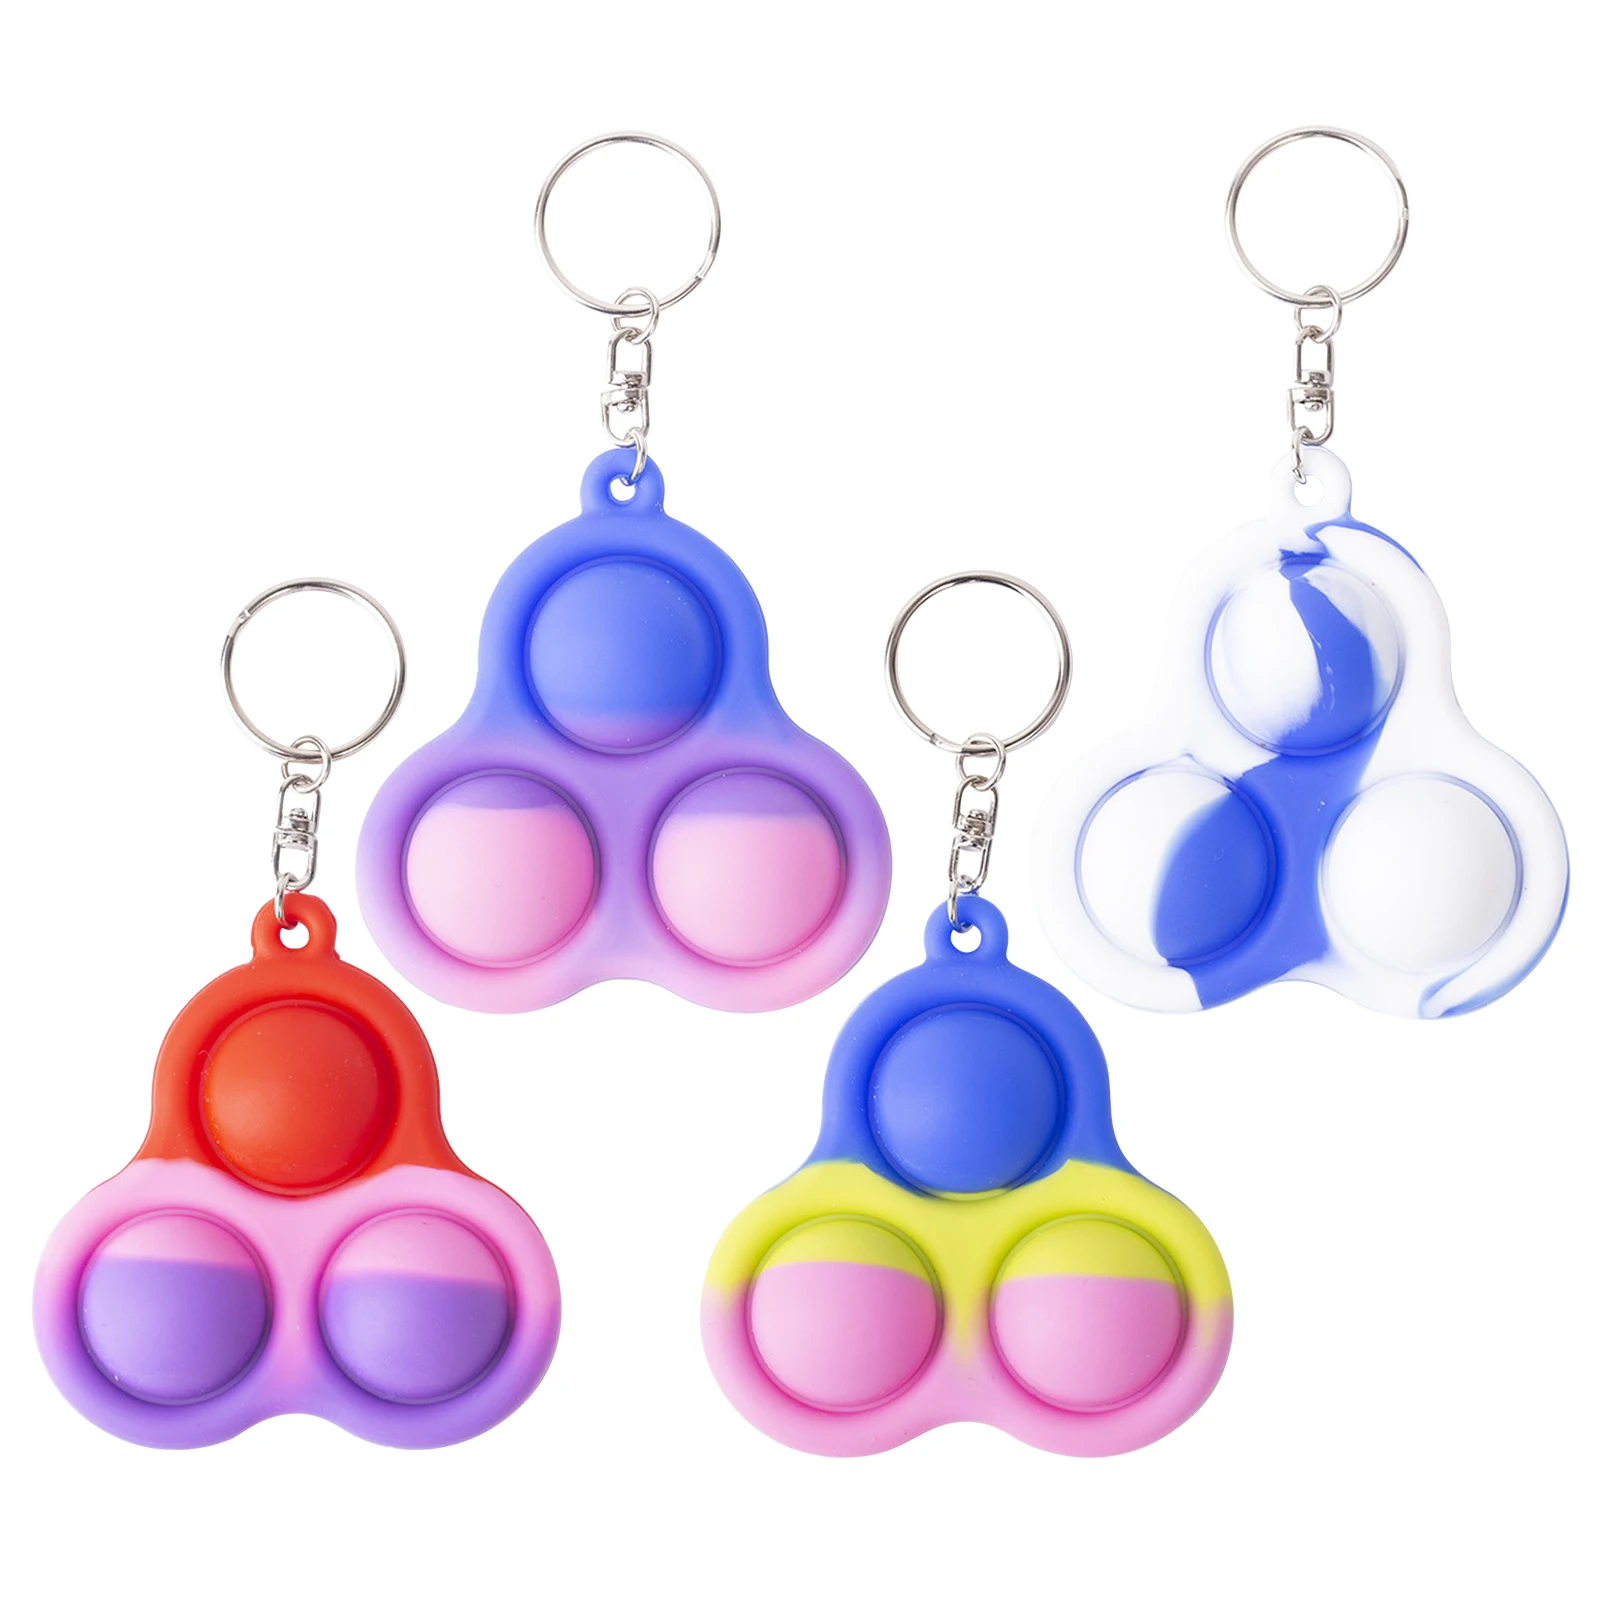 Fidget Toy Key-Chain Popper Stress-Relief Hand-Sensory Dimple Mini New with for Gifts